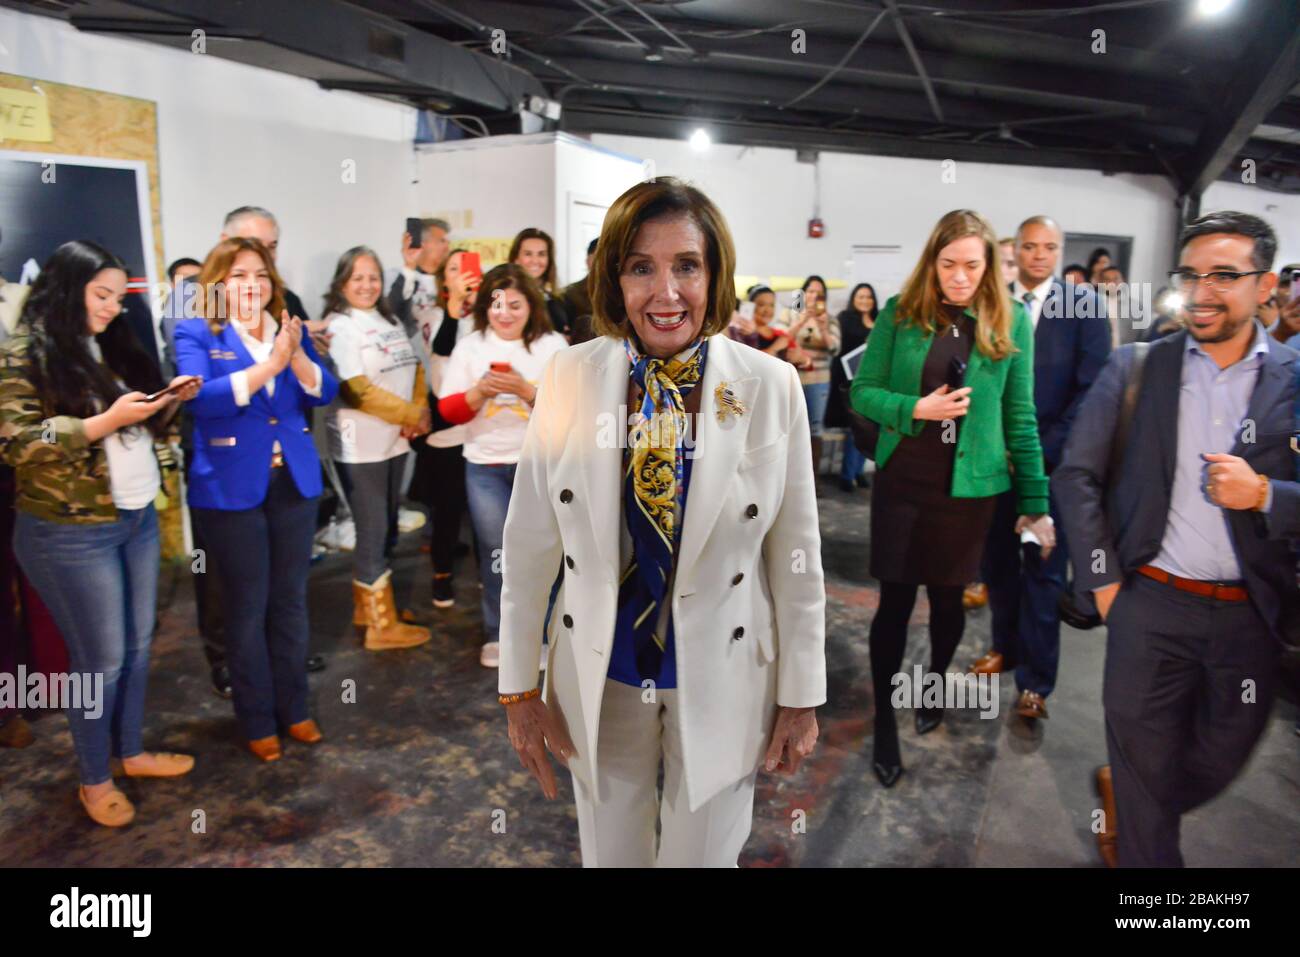 House Speaker NANCY PELOSI arrives to speak to supporters of Congressman HENRY CUELLAR  during a campaign stop at Cuellar's headquarters in Laredo, Tx. prior to the Texas primary. Stock Photo